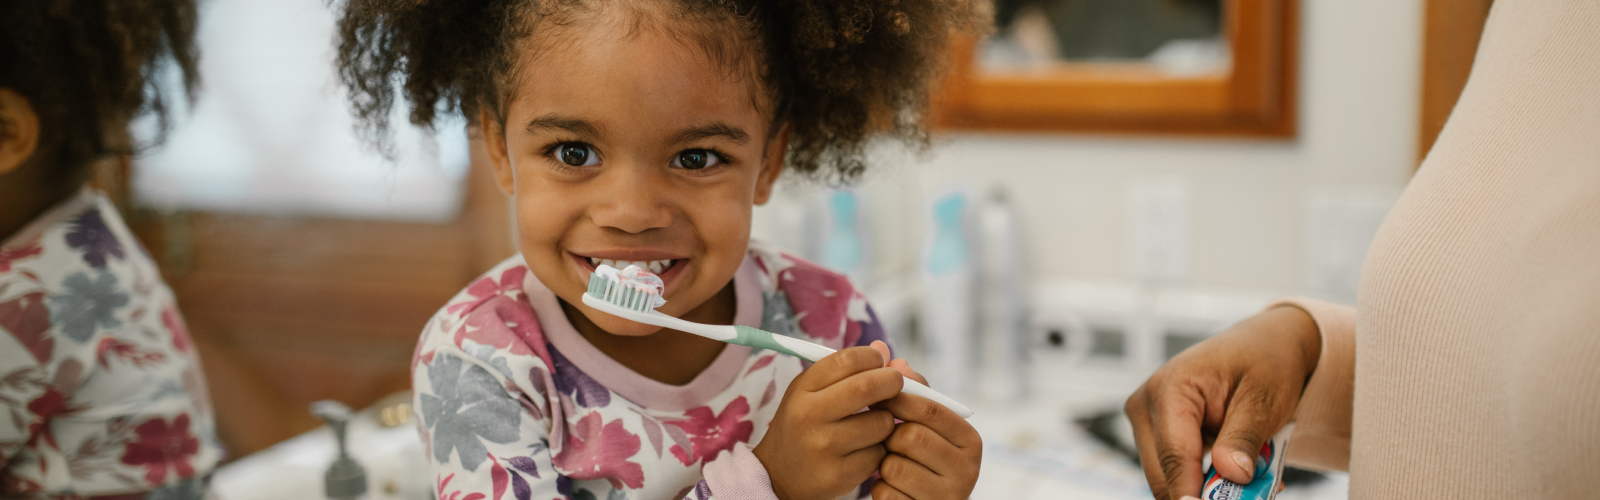 5 ways to brush your teeth the eco-friendly way